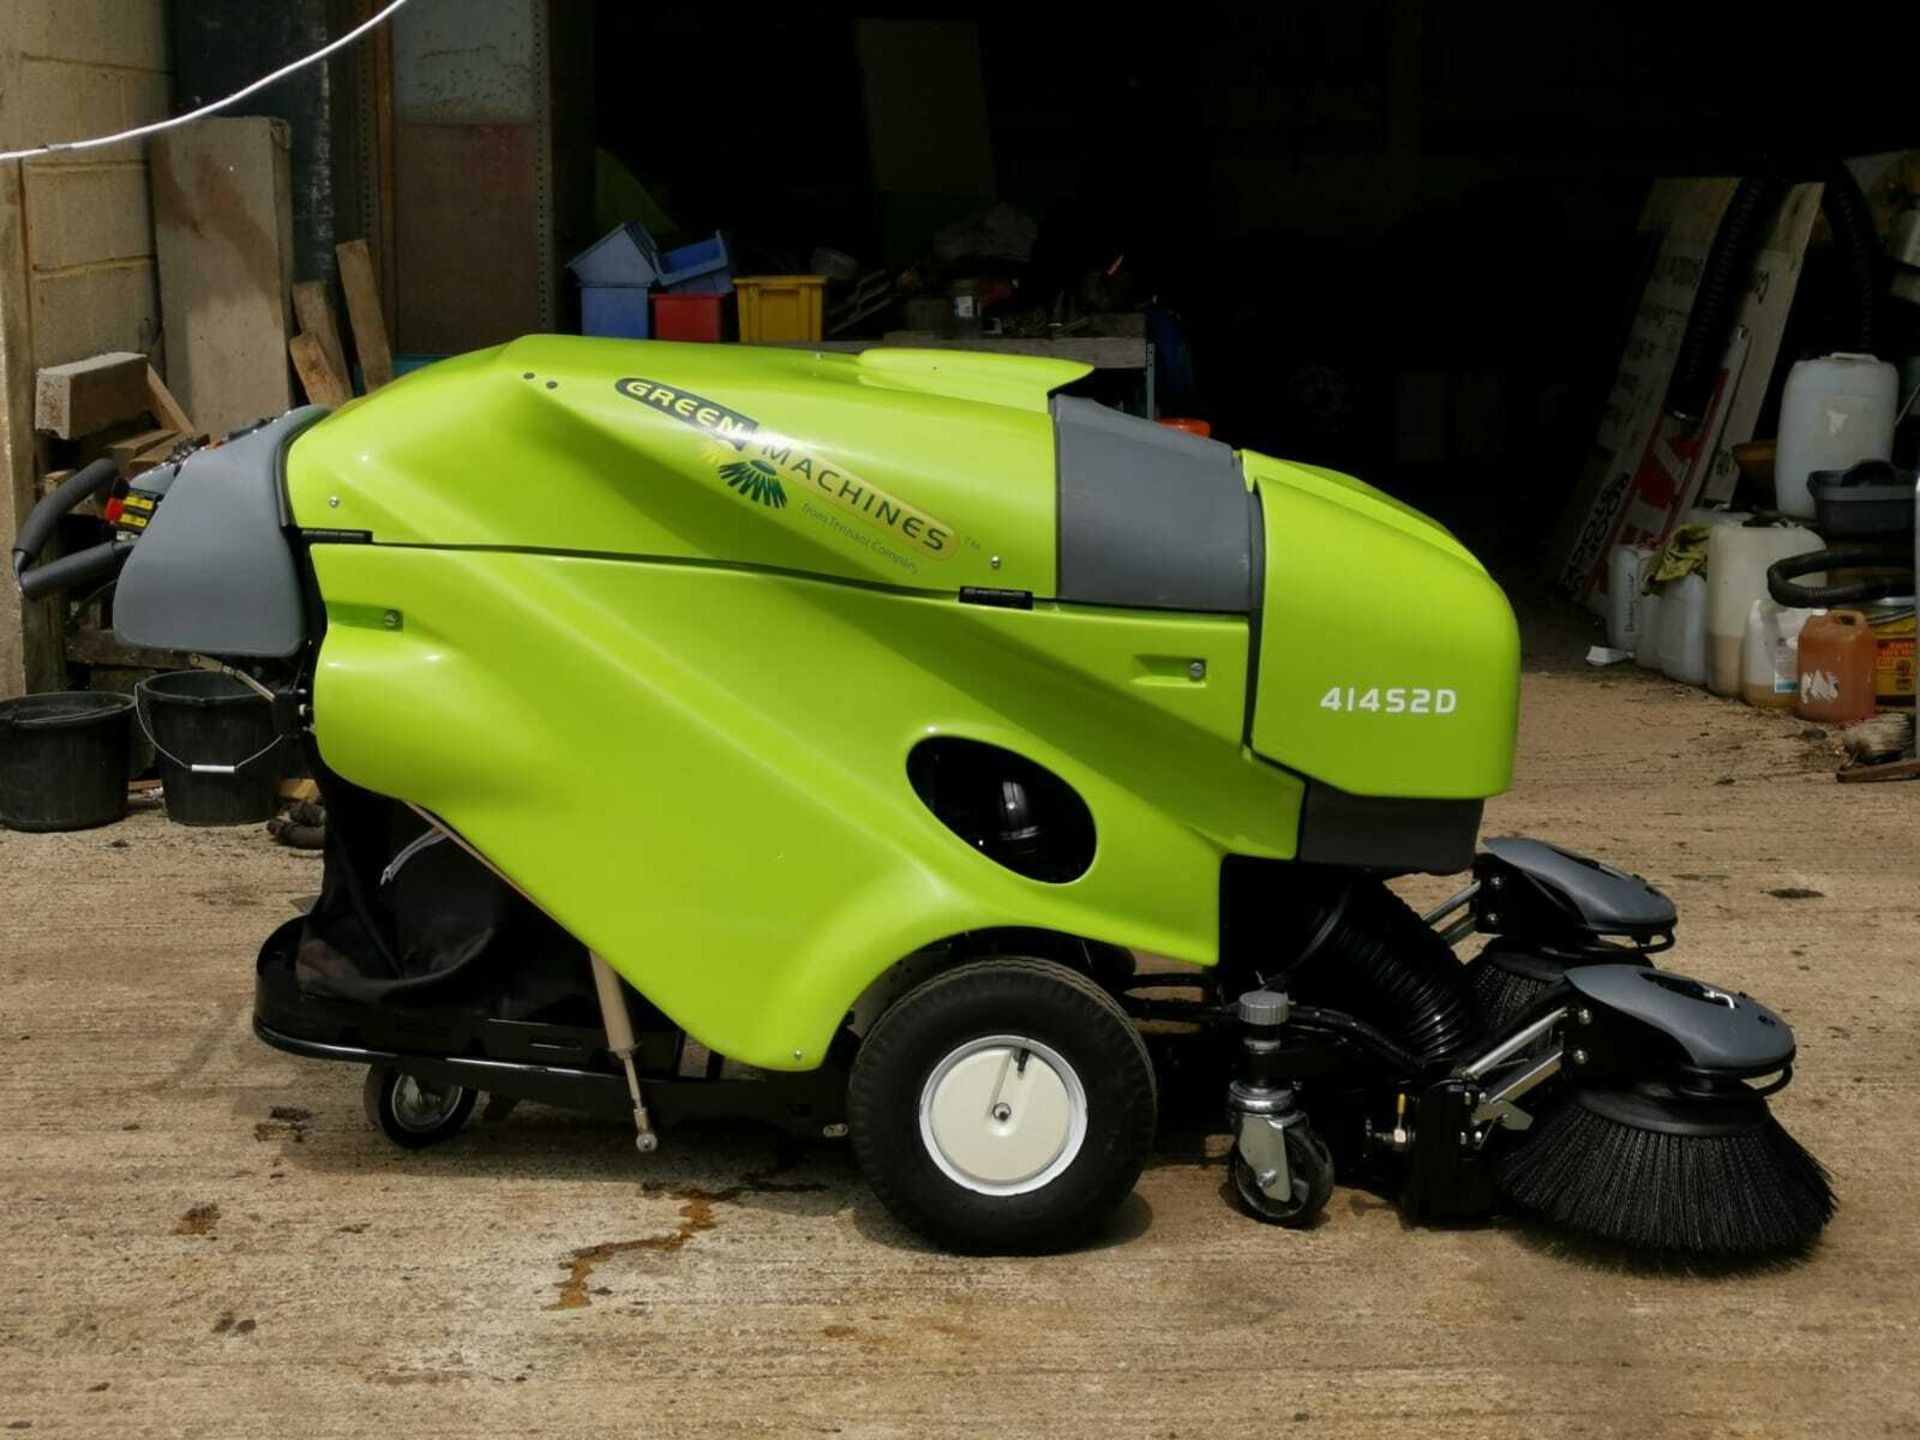 TENNANT GREEN MACHINE MODEL: 414S2D PEDESTRIAN SWEEPER, ONLY 75 HOURS, YEAR 2014. *PLUS VAT* - Image 7 of 9